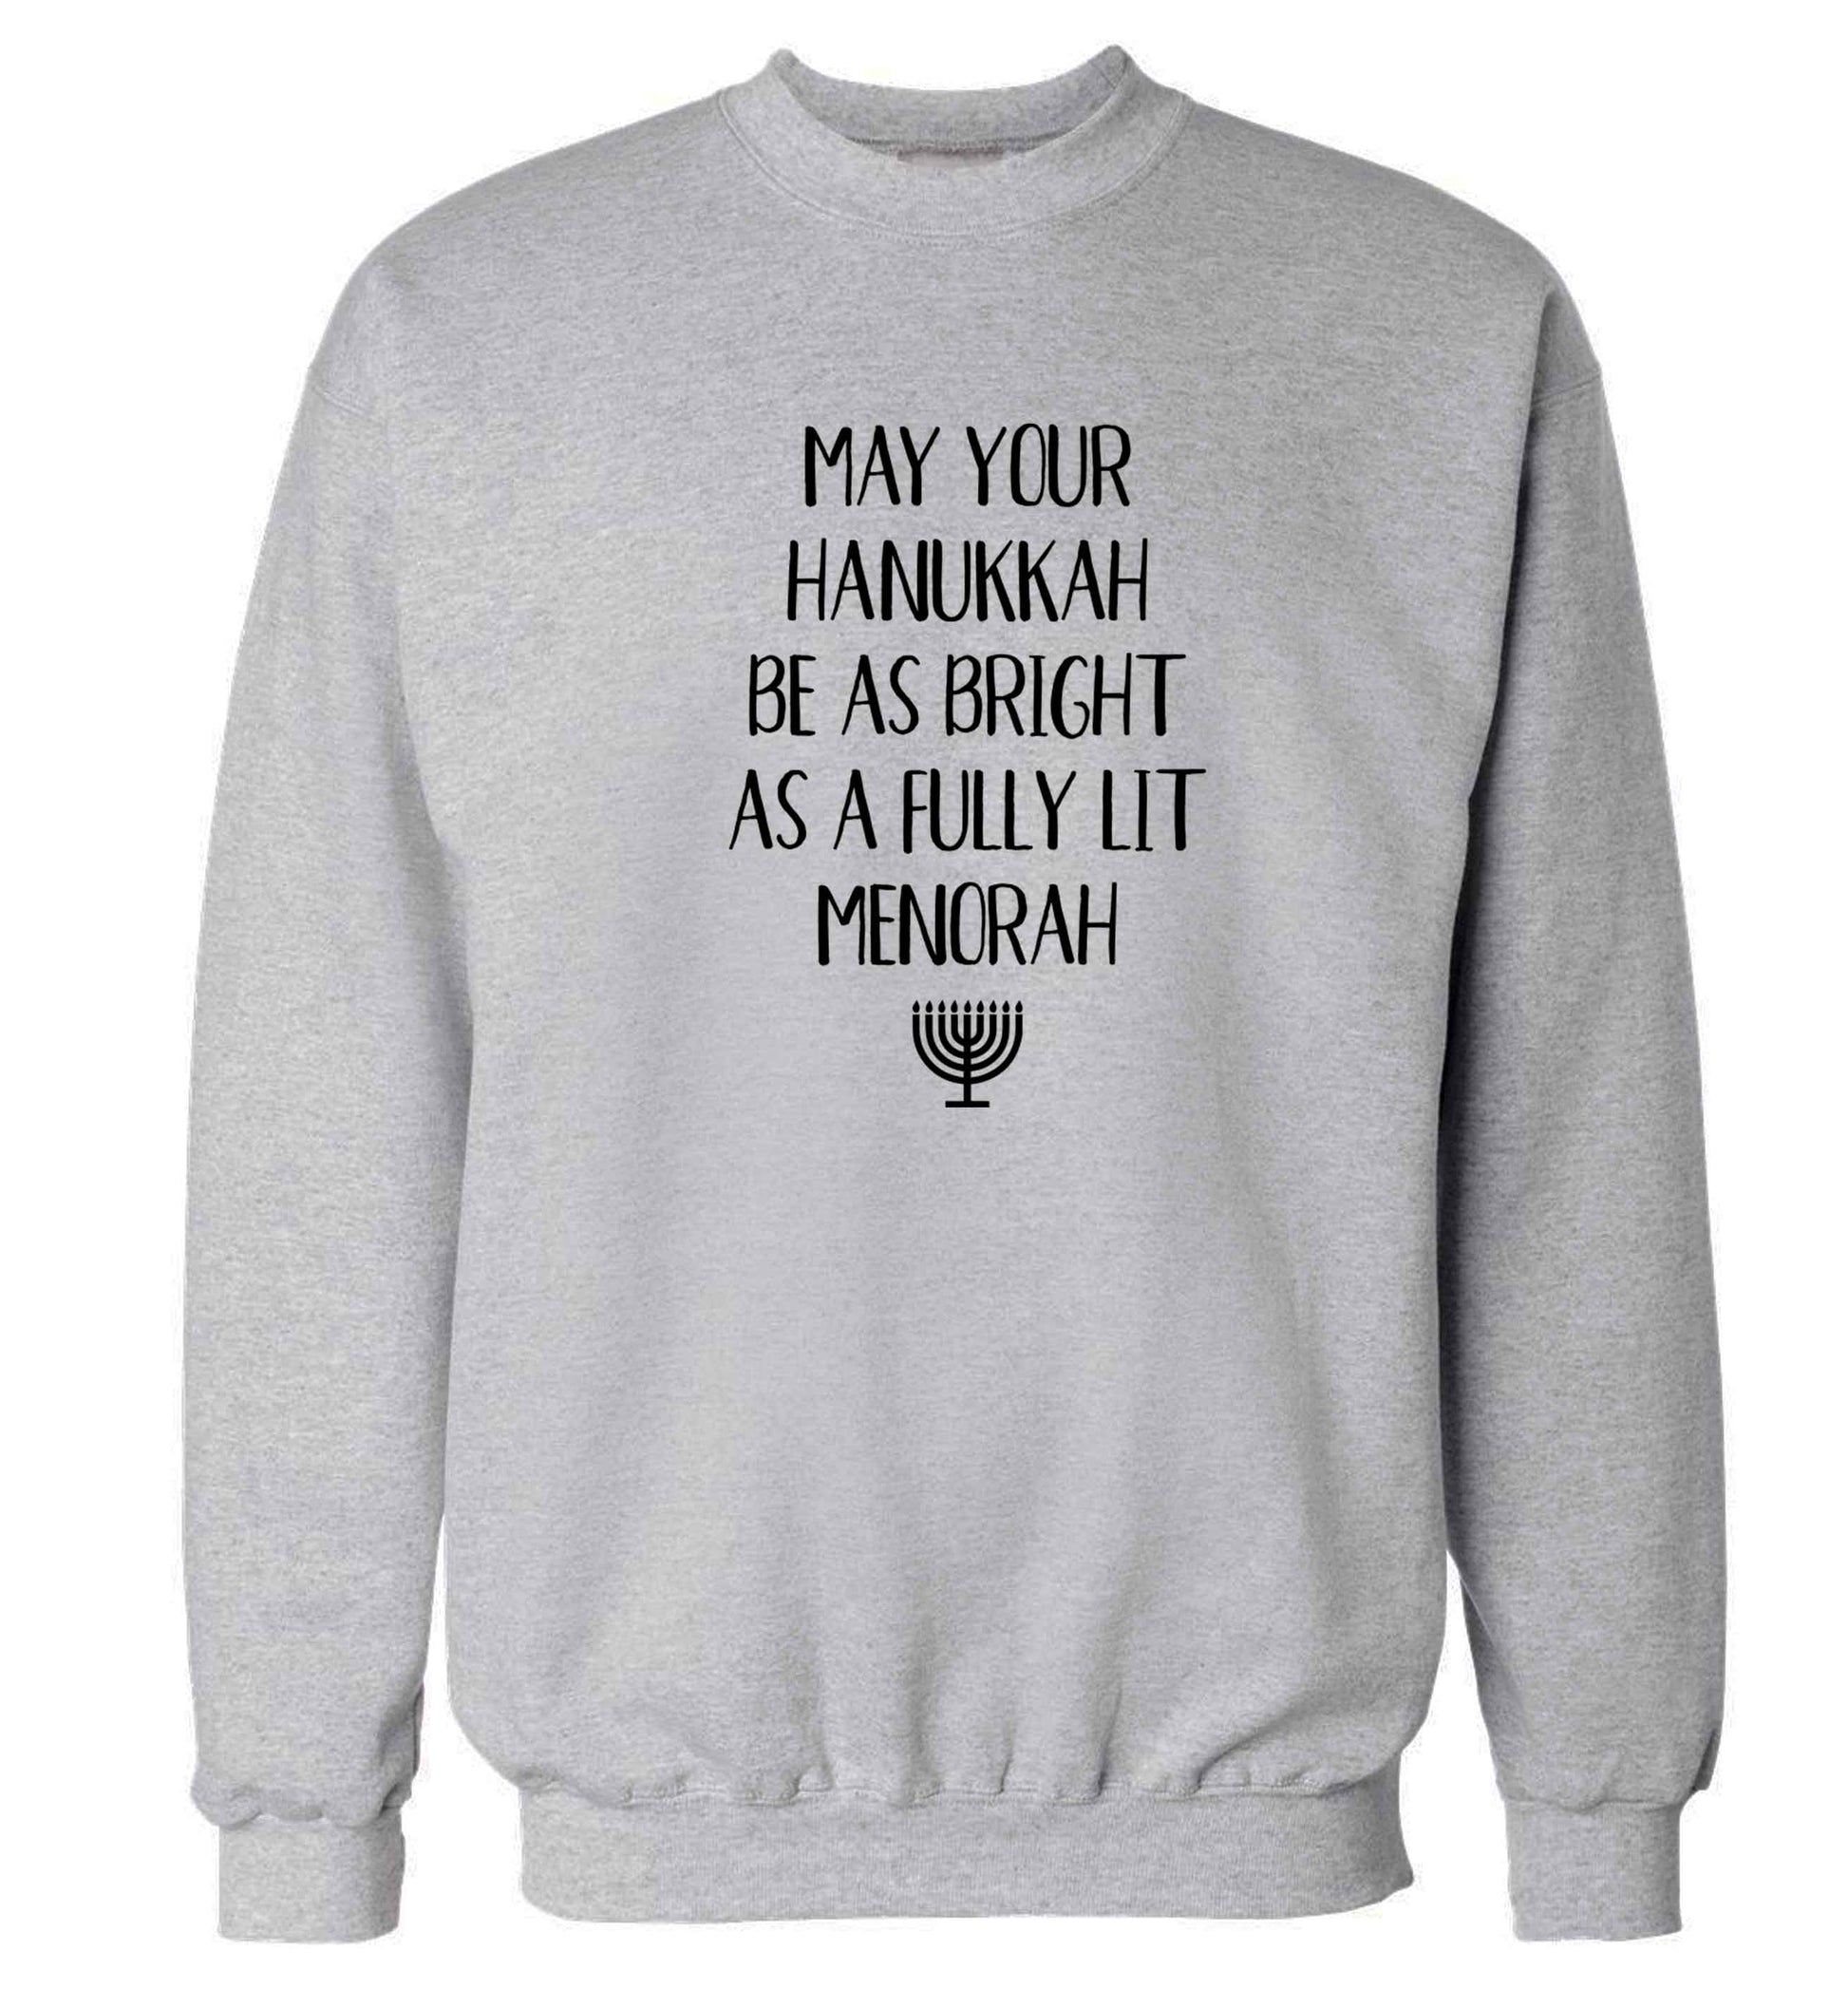 May your hanukkah be as bright as a fully lit menorah Adult's unisex grey Sweater 2XL